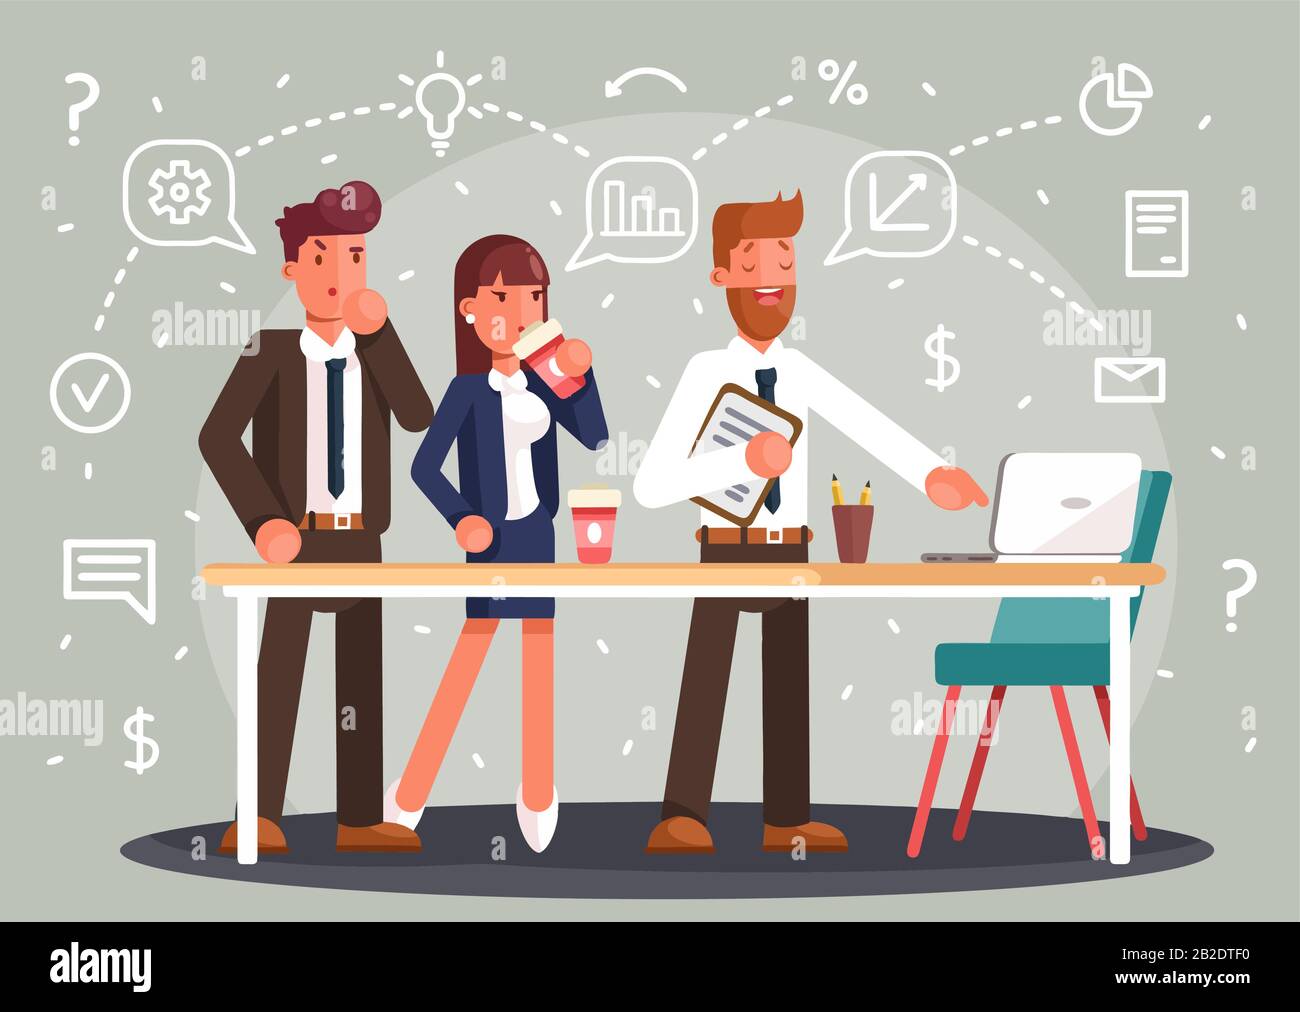 Brainstorming creative team idea discussion people. Flat style vector illustration Stock Vector